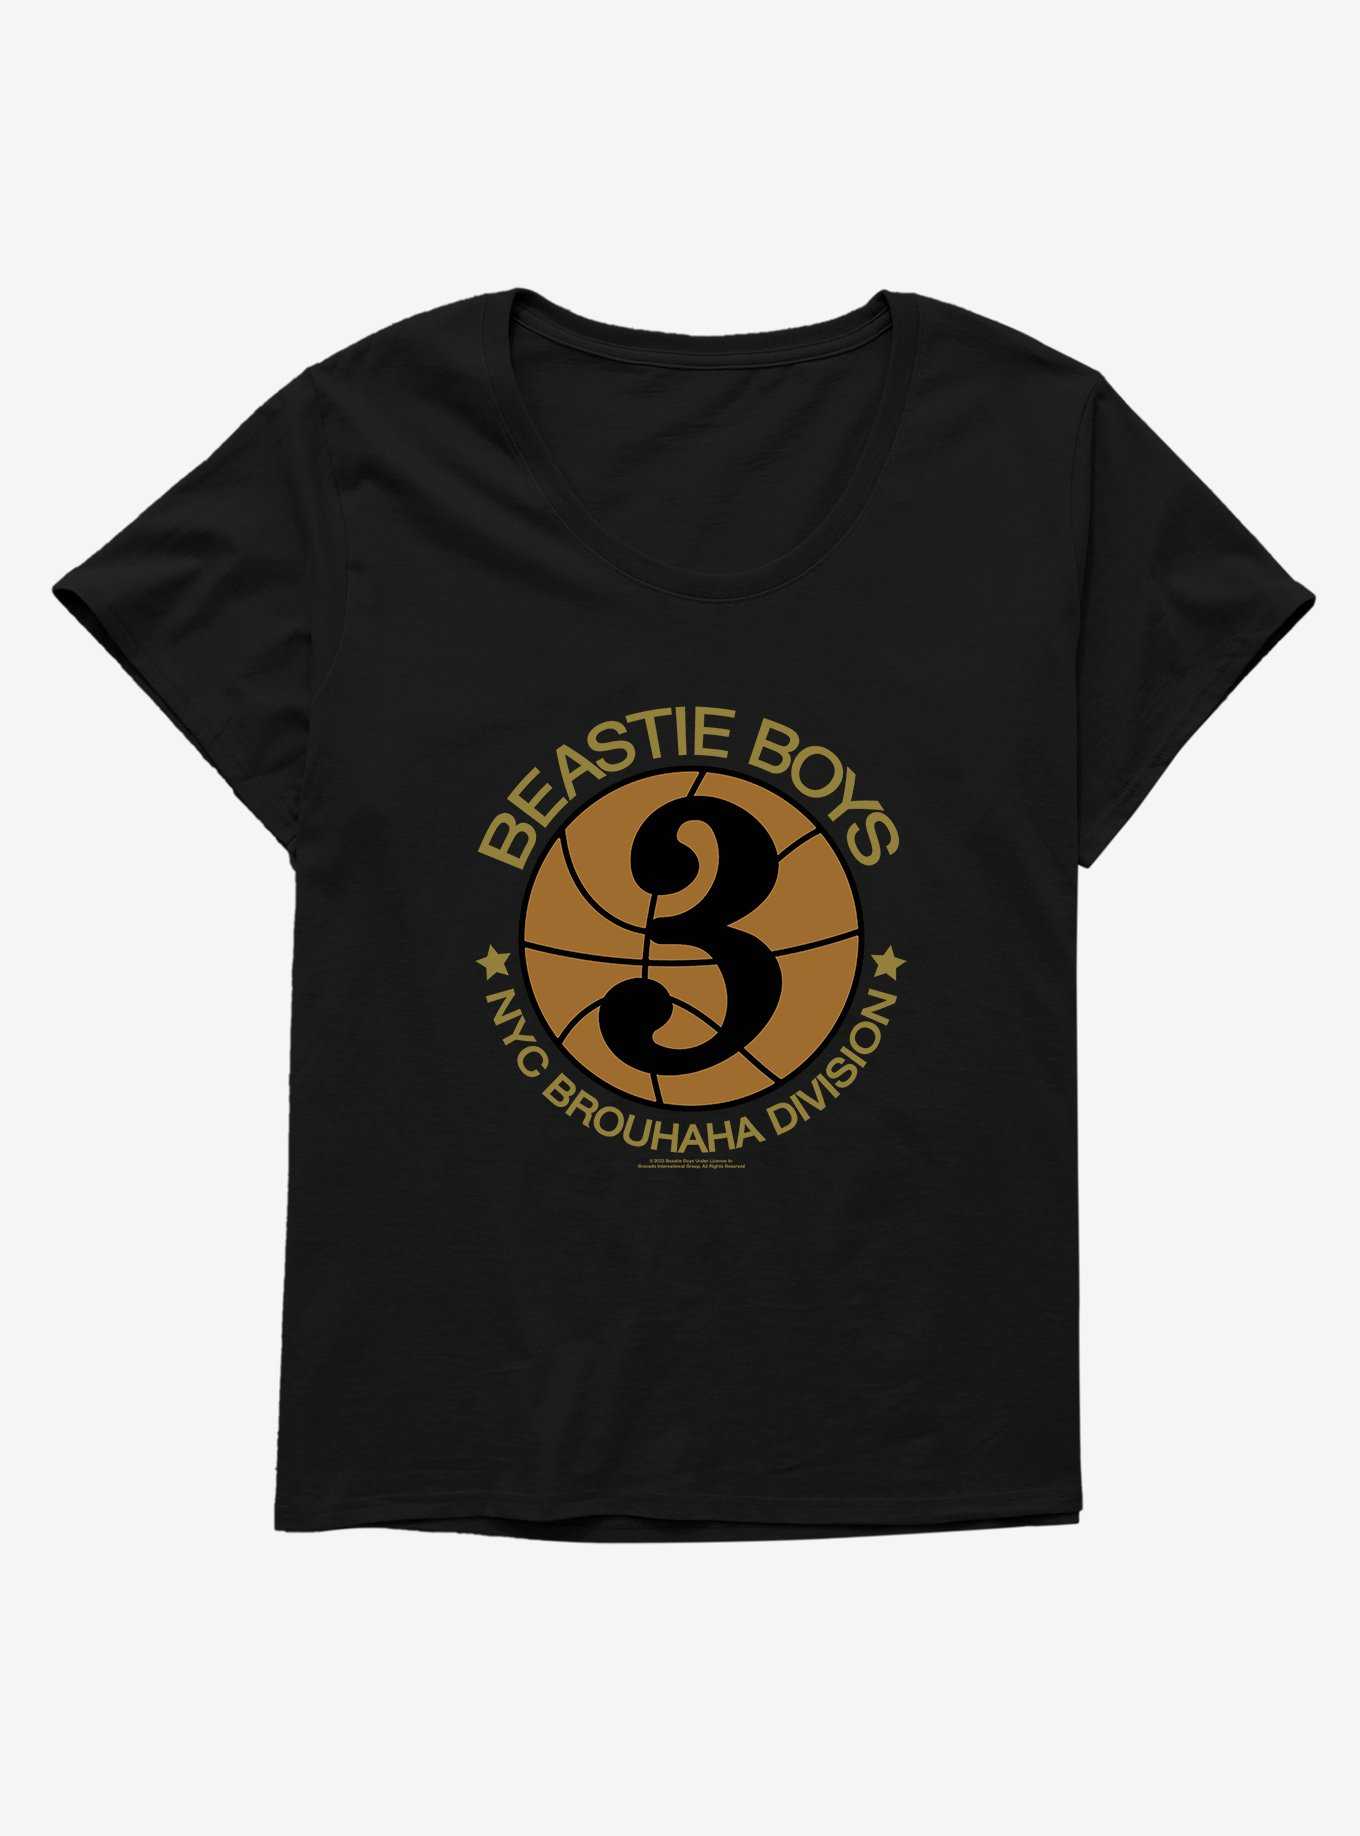 Beastie Boys NYC Brouhaha Division Girls T-Shirt Plus Size, , hi-res